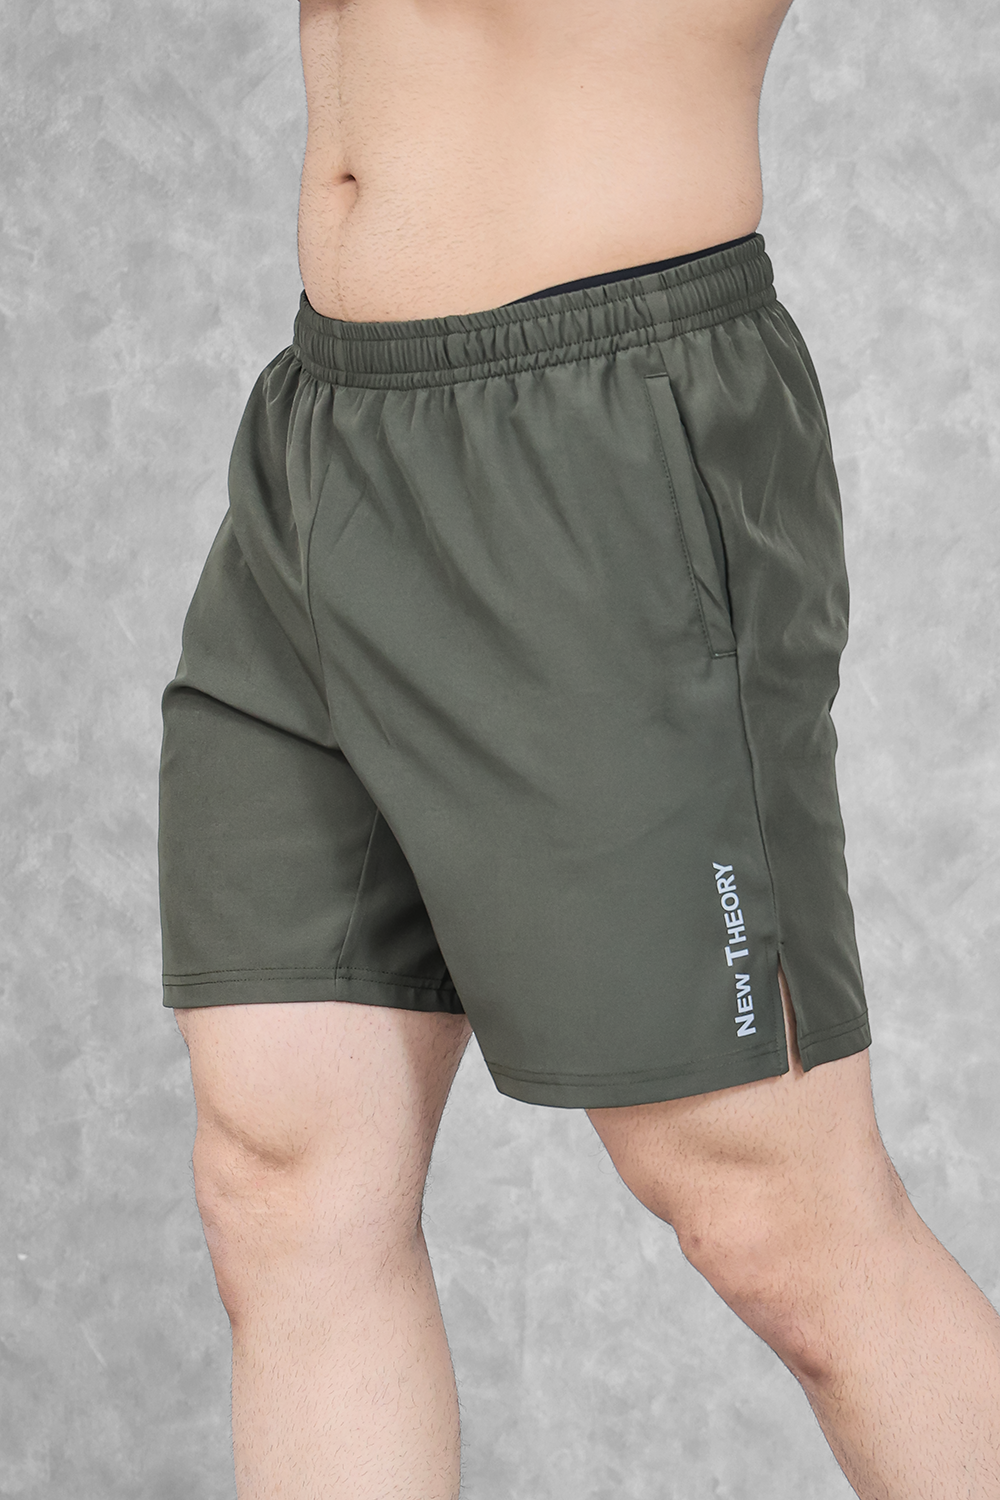 Dry-Fit Woven shorts- Olive